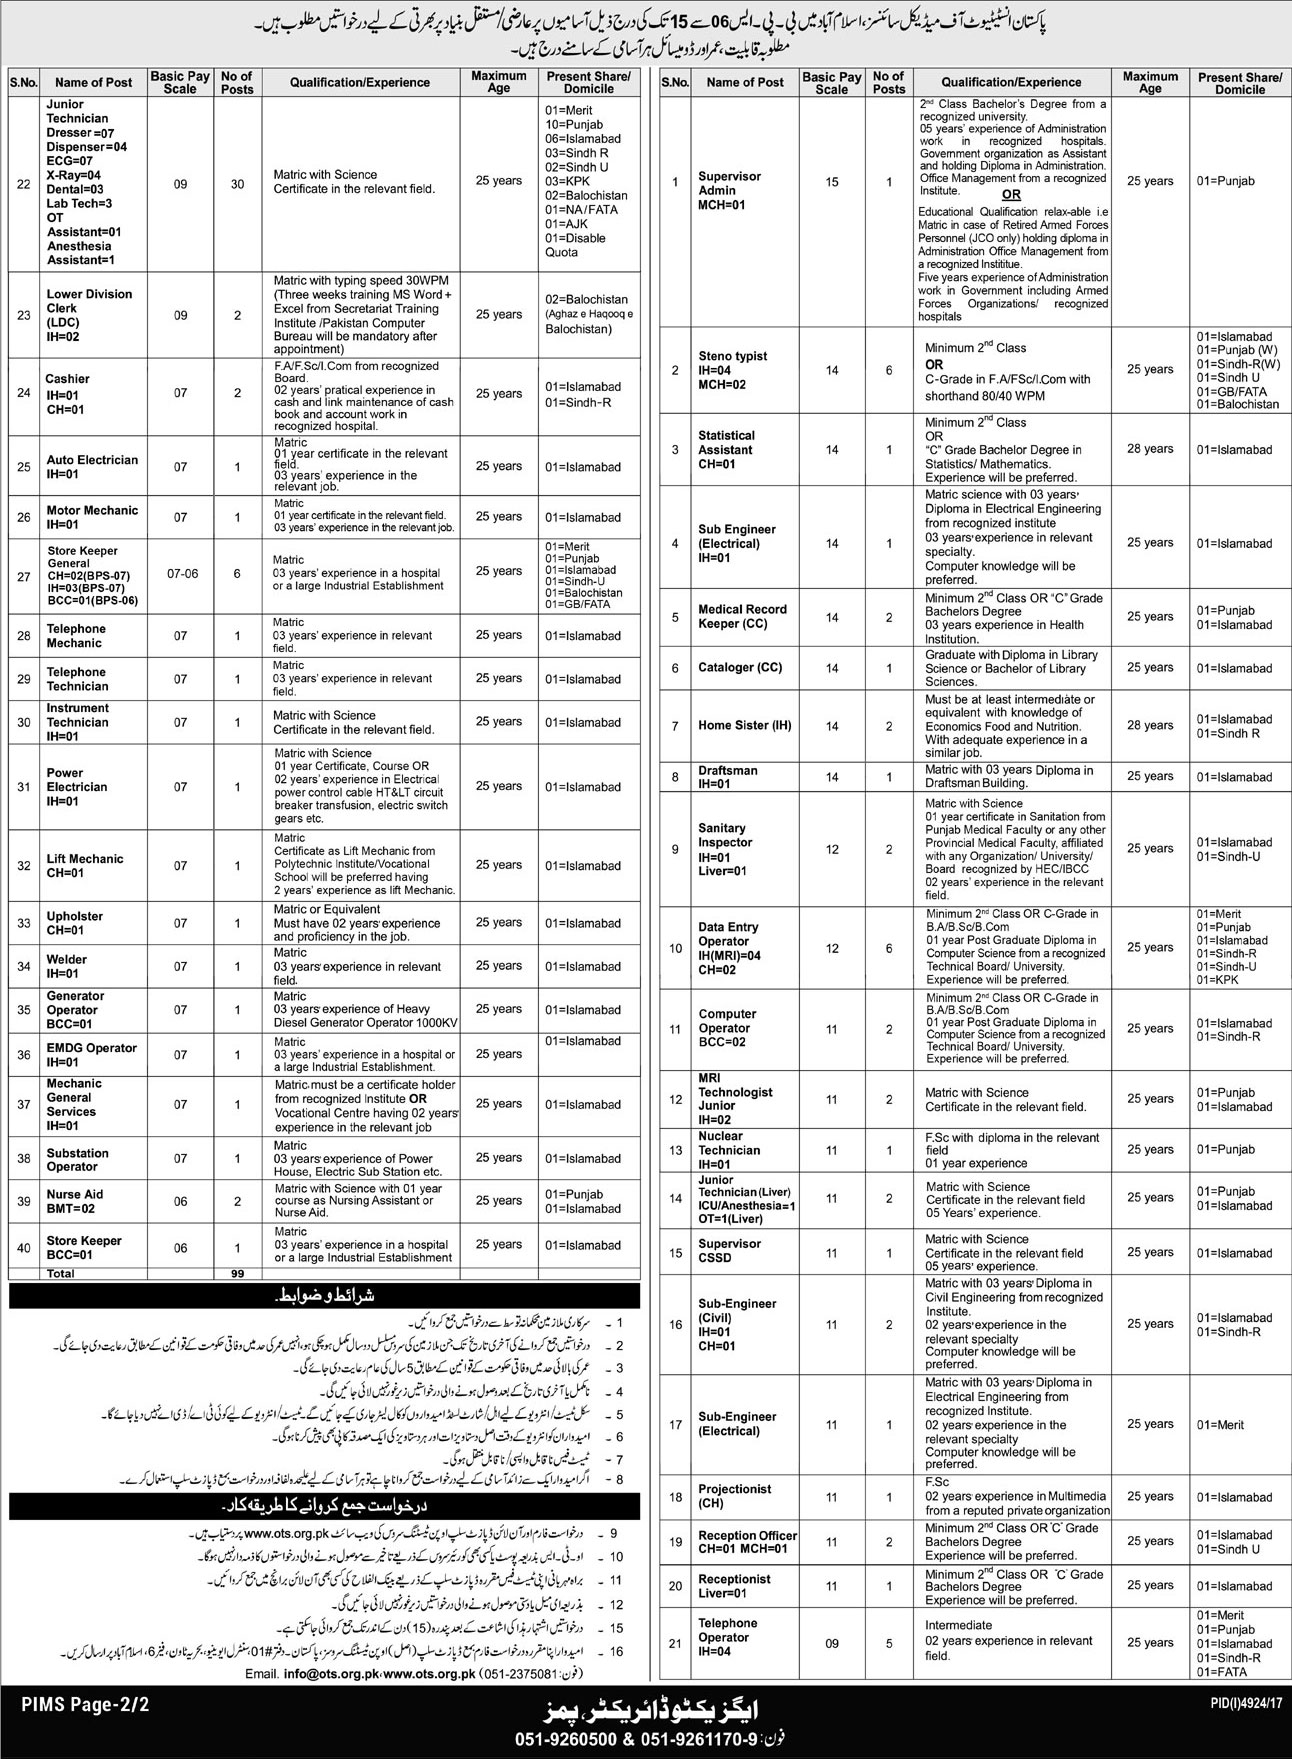 Jobs in Pakistan Institute of Medical Sciences Islamabad 11 March 2018